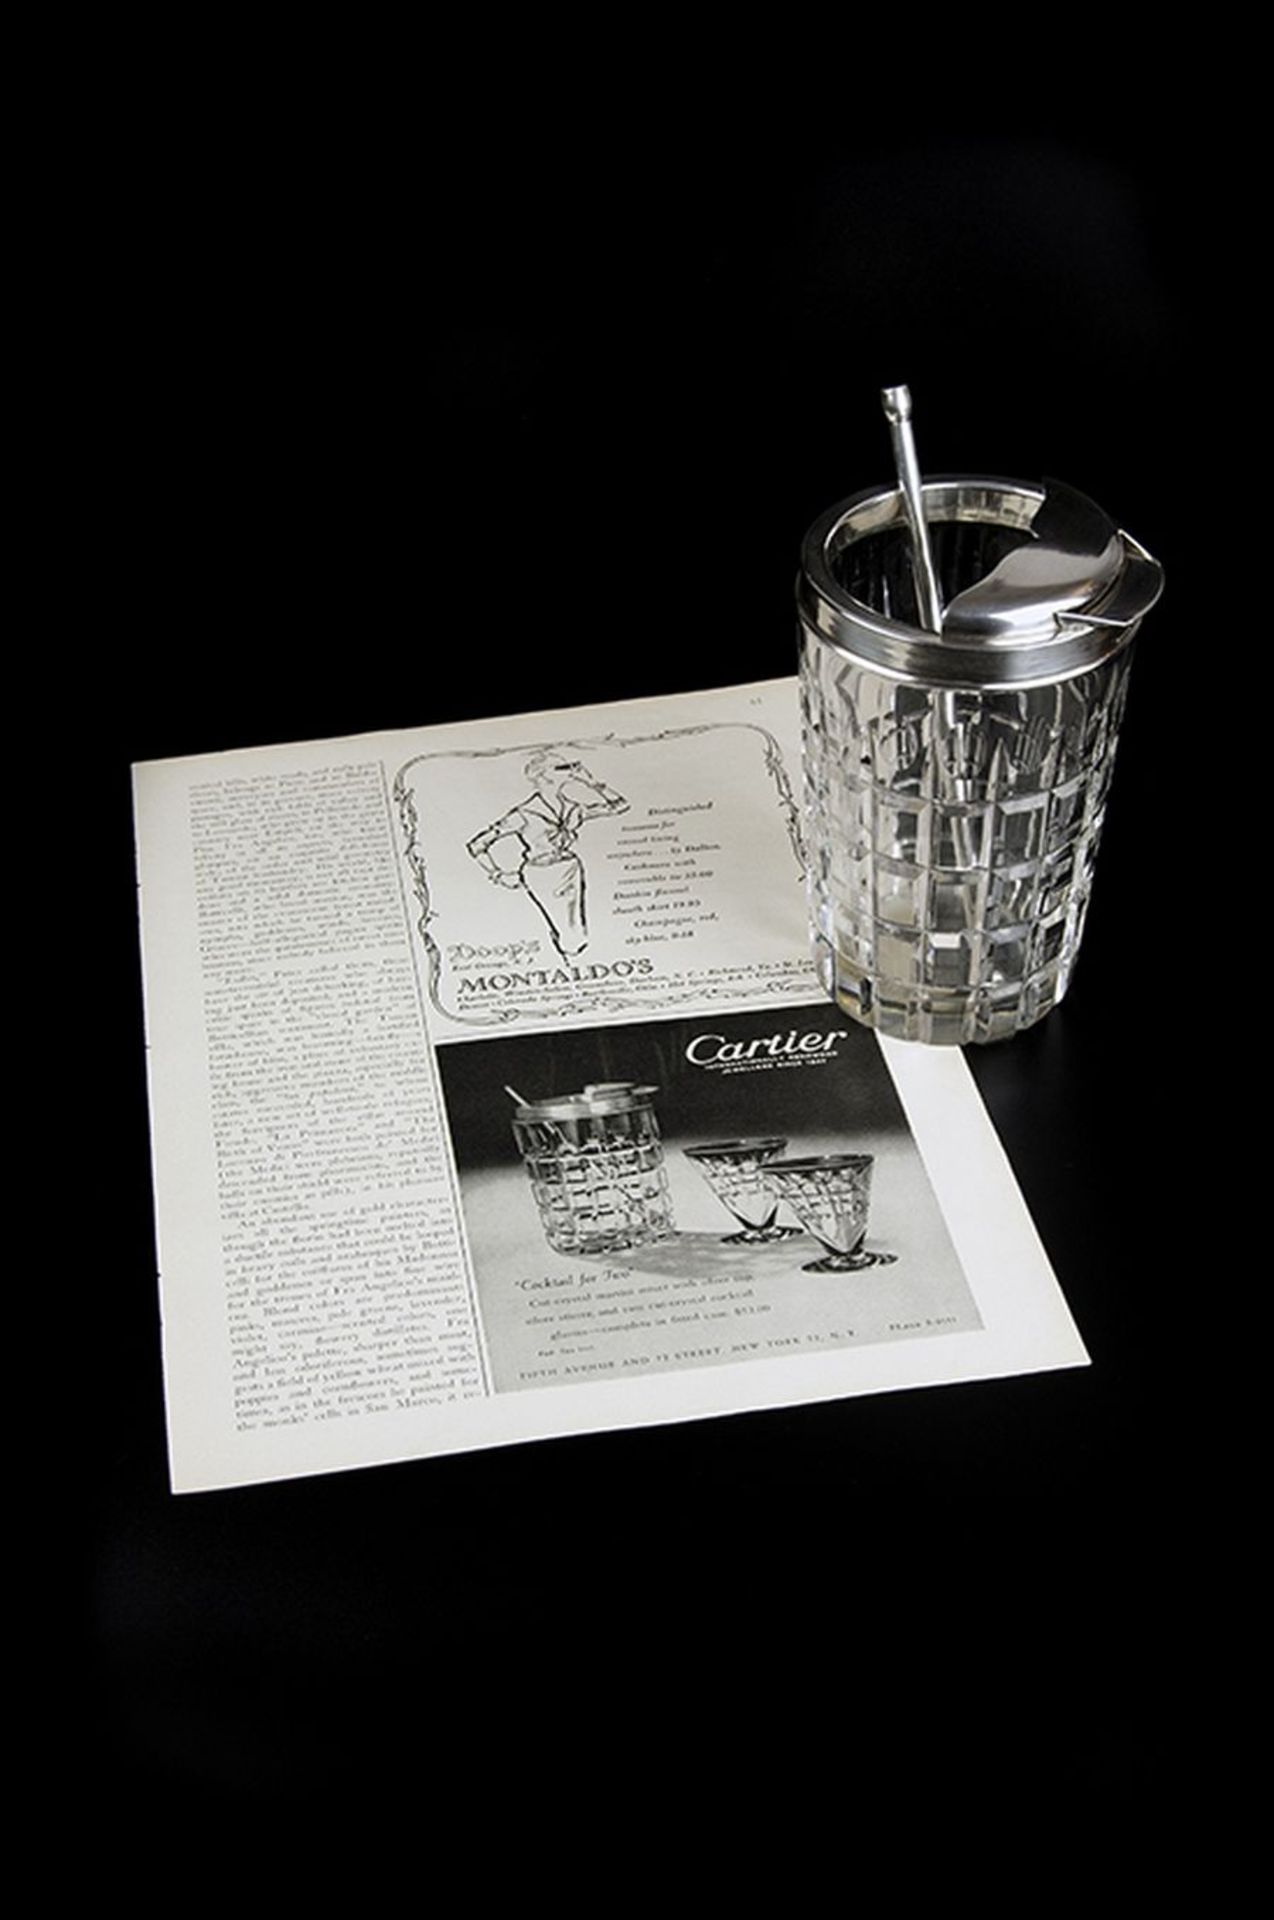 Bar item - Together with a page of advertisement Cut-crystal martini mixer with [...]